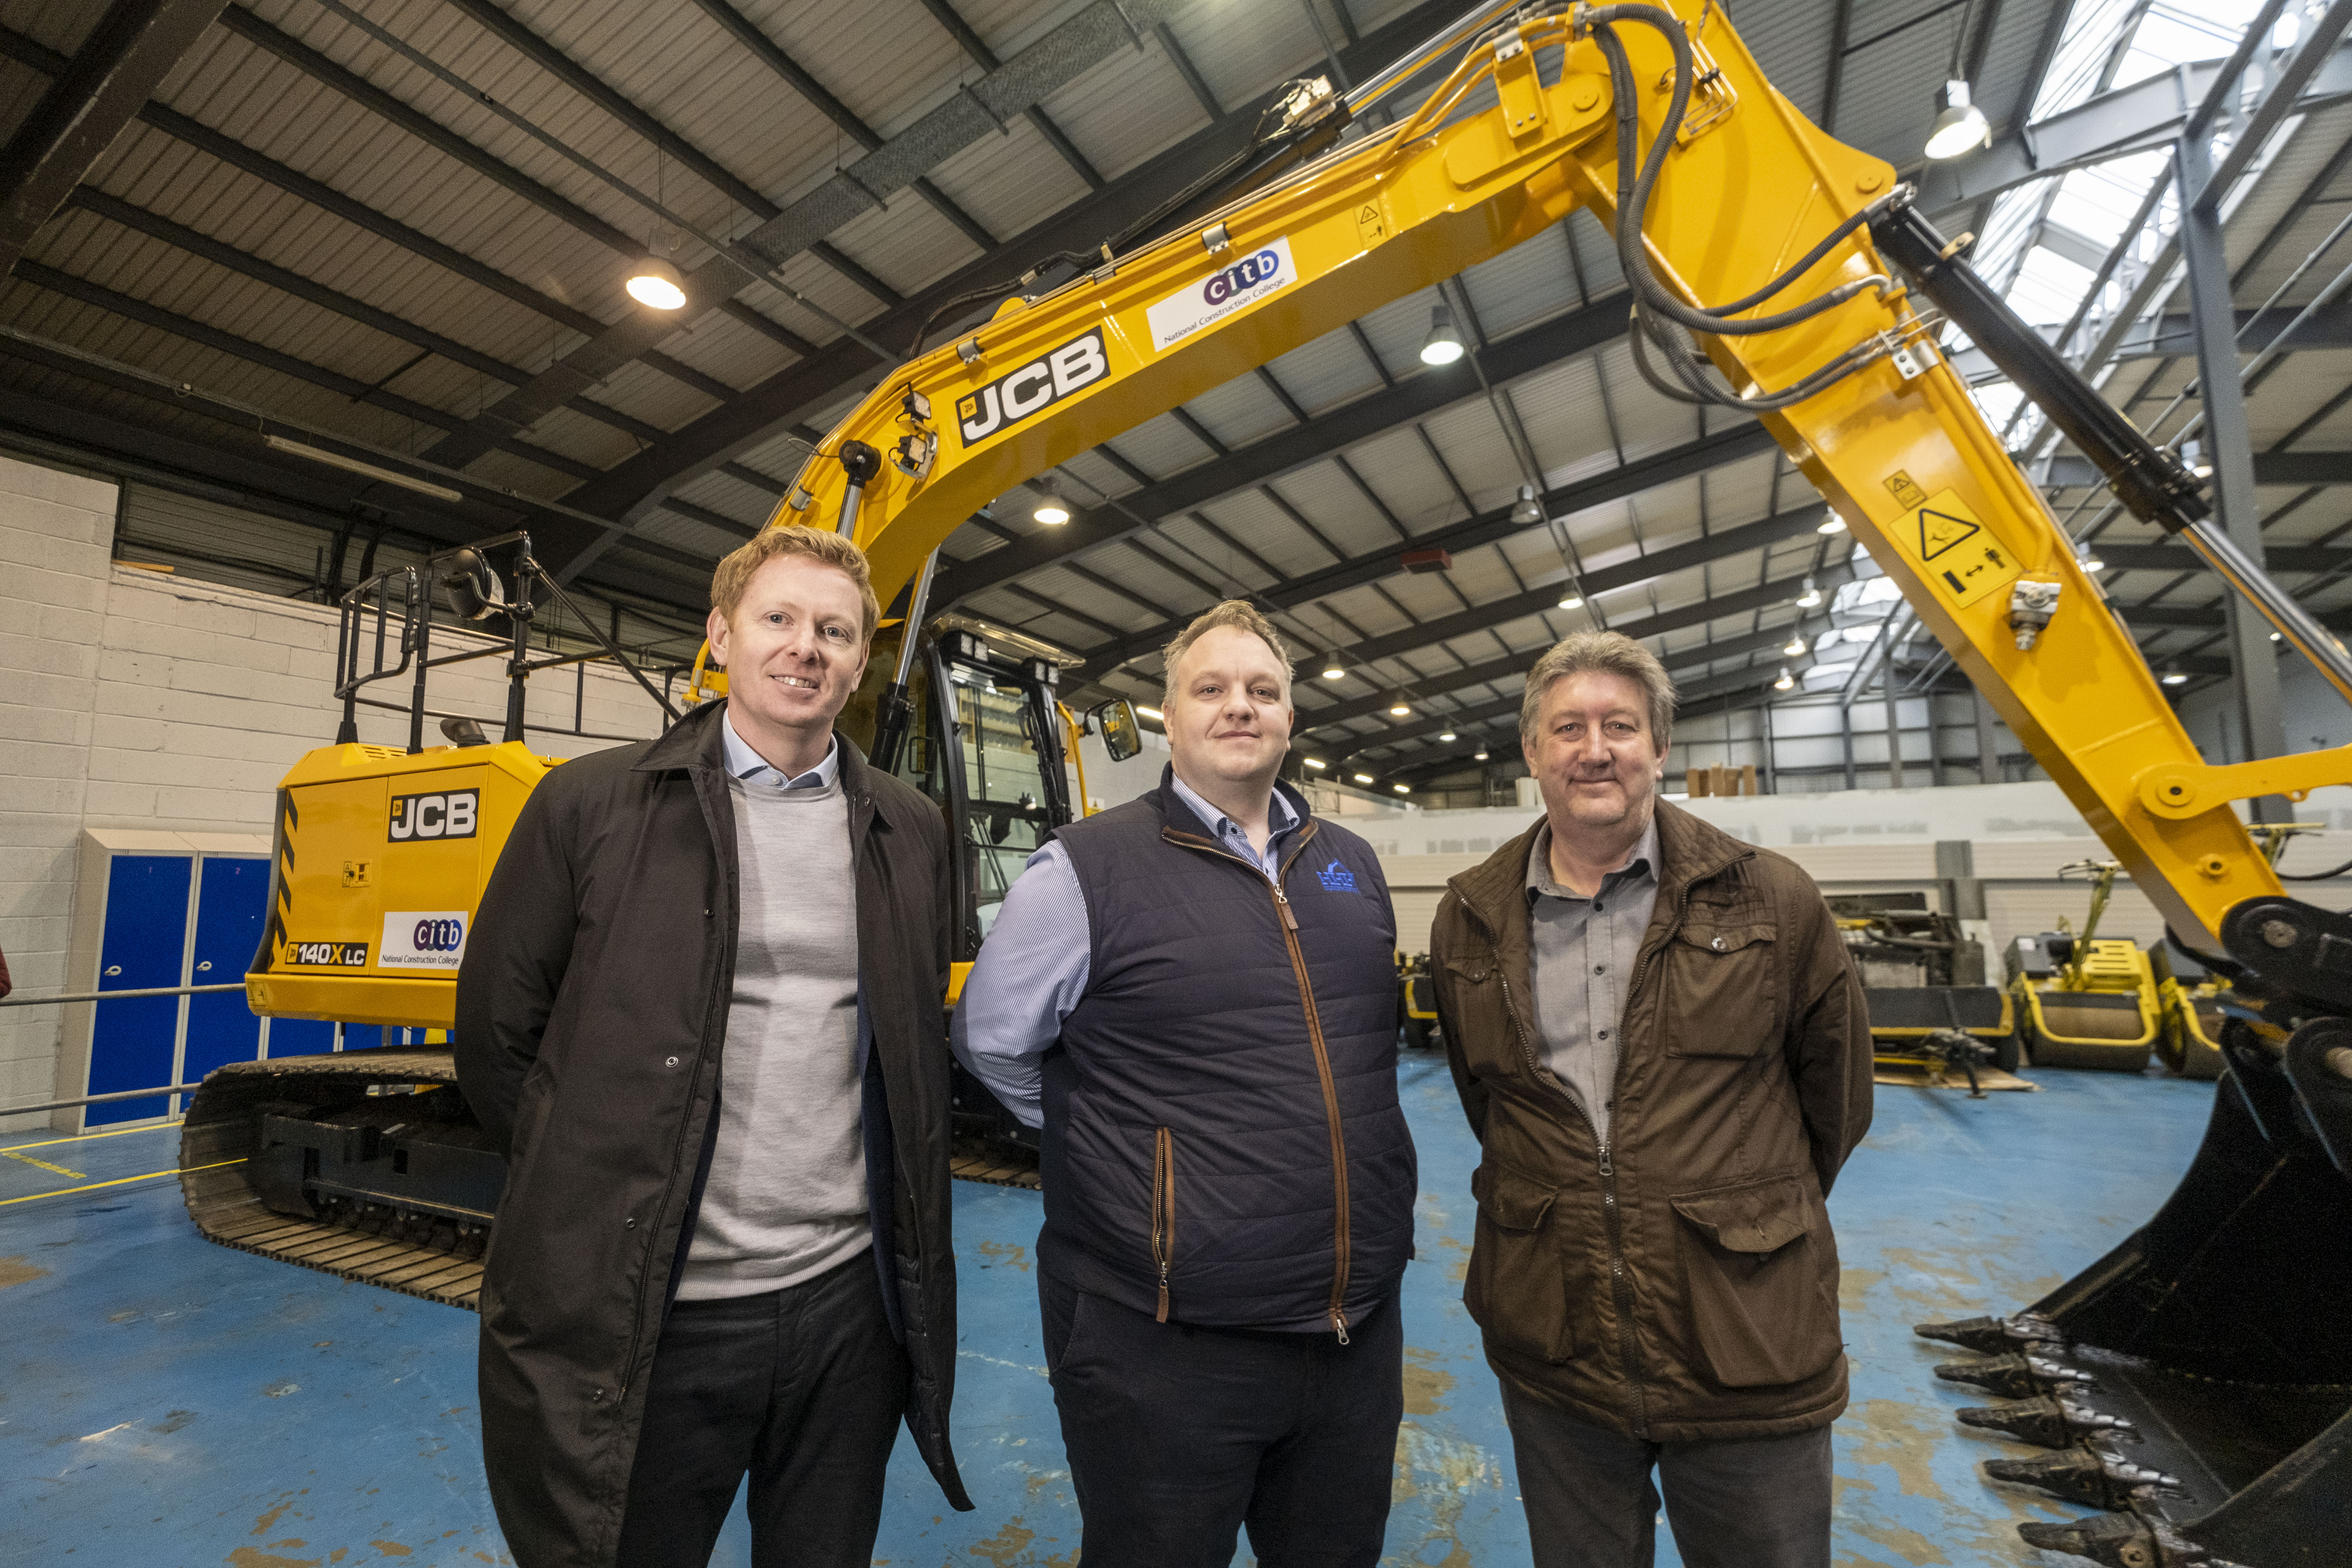 Plant organisations collaborate to upgrade equipment at NCC Inchinnan